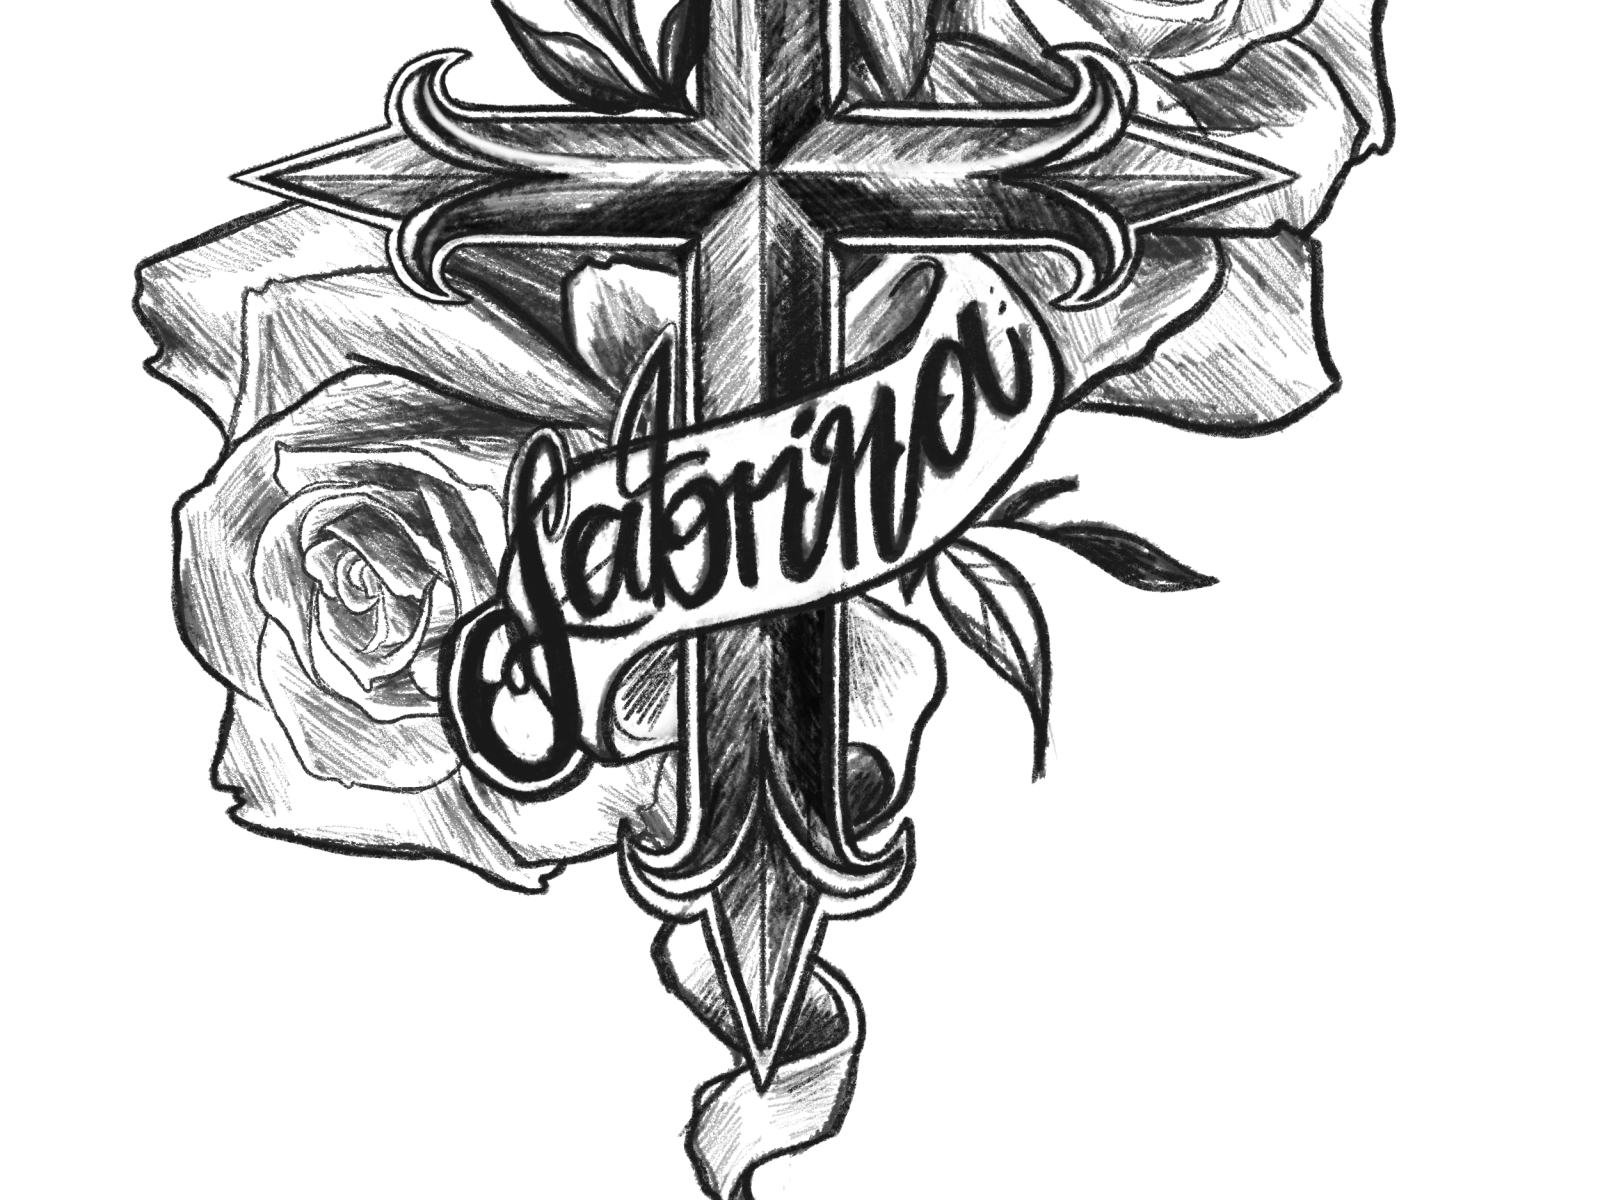 Memorial tattoo sketch by Jess on Dribbble